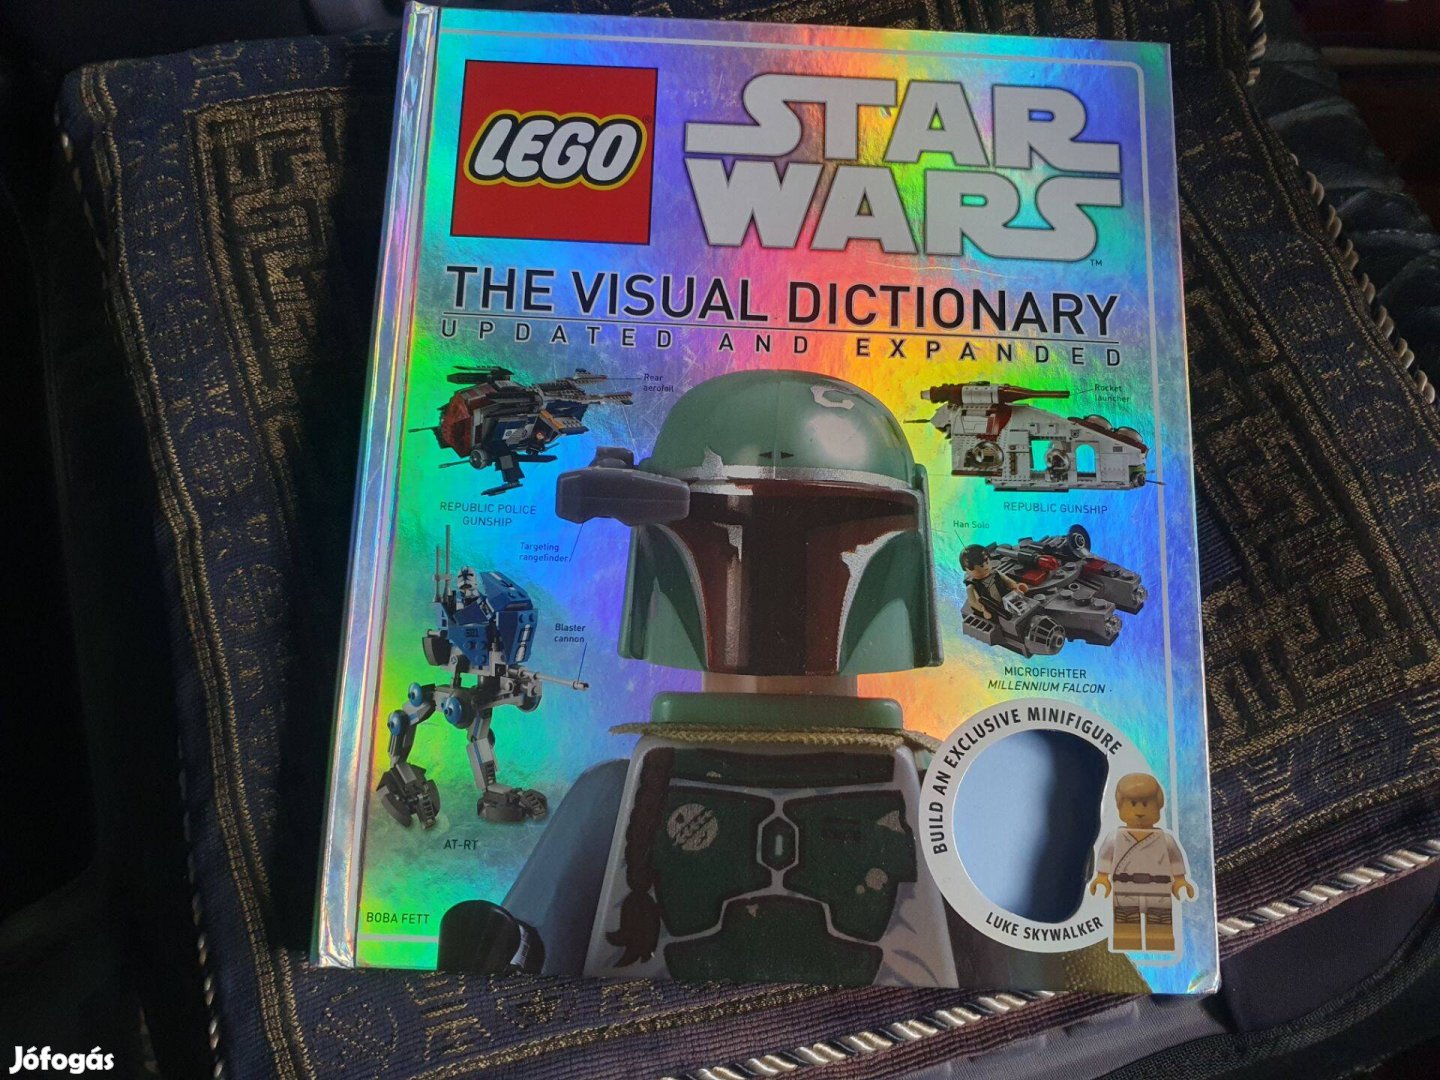 LEGO Star Wars: The Visual Dictionary - Updated and Expanded Review